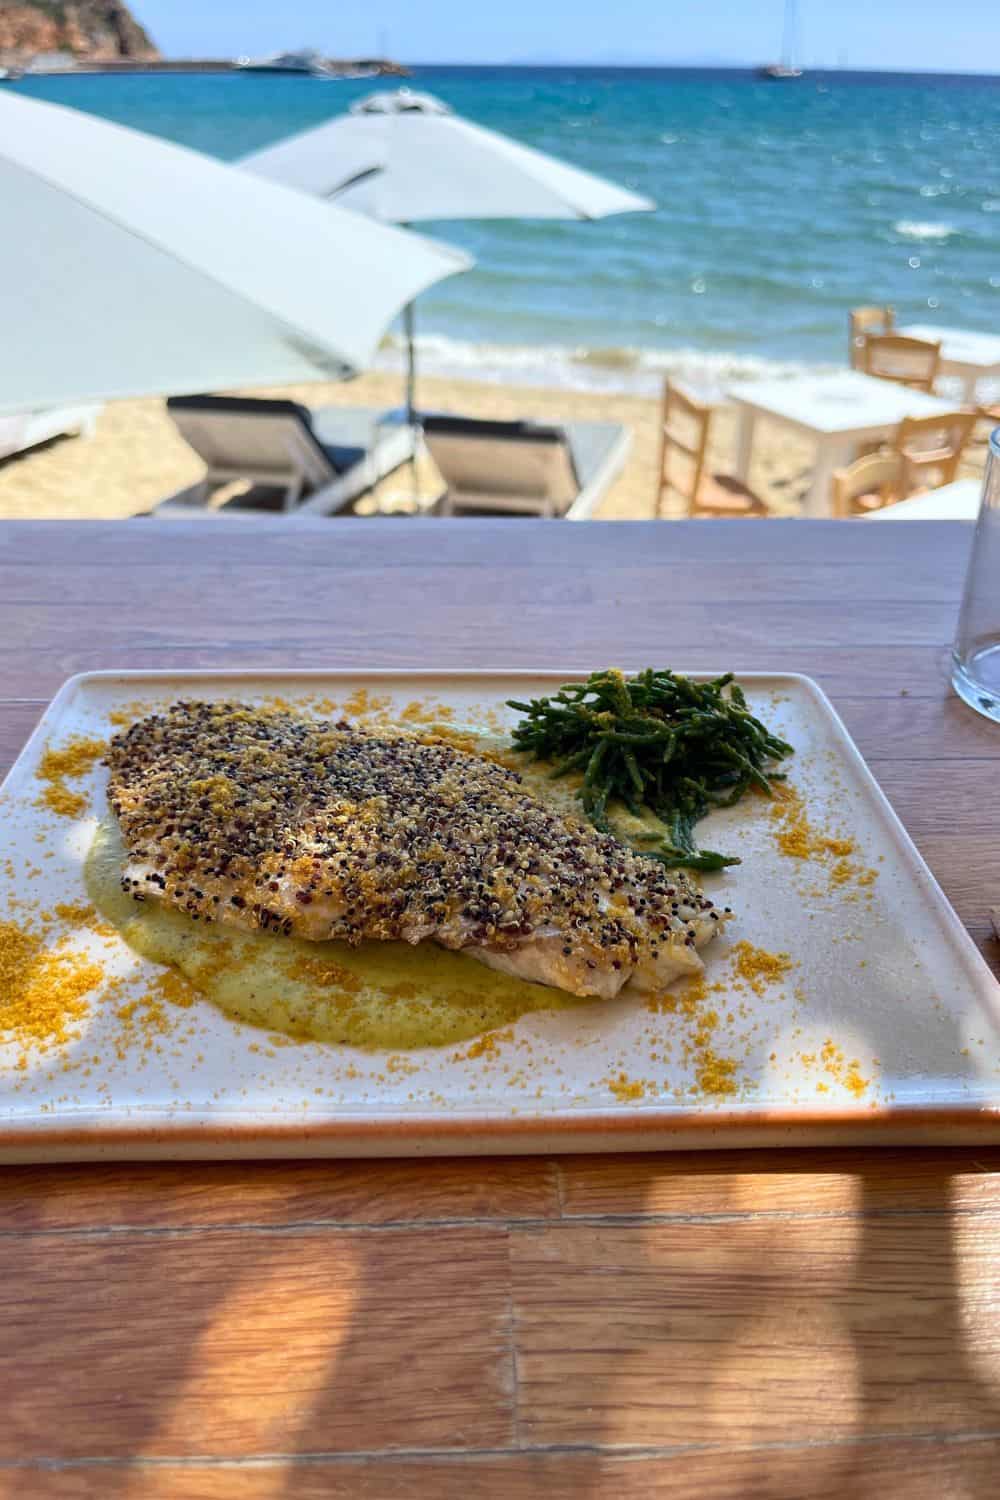 A plate featuring a filet of fish encrusted with herbs, accompanied by a side of greens, served on a wooden table with a seaside view under the shade of white umbrellas.